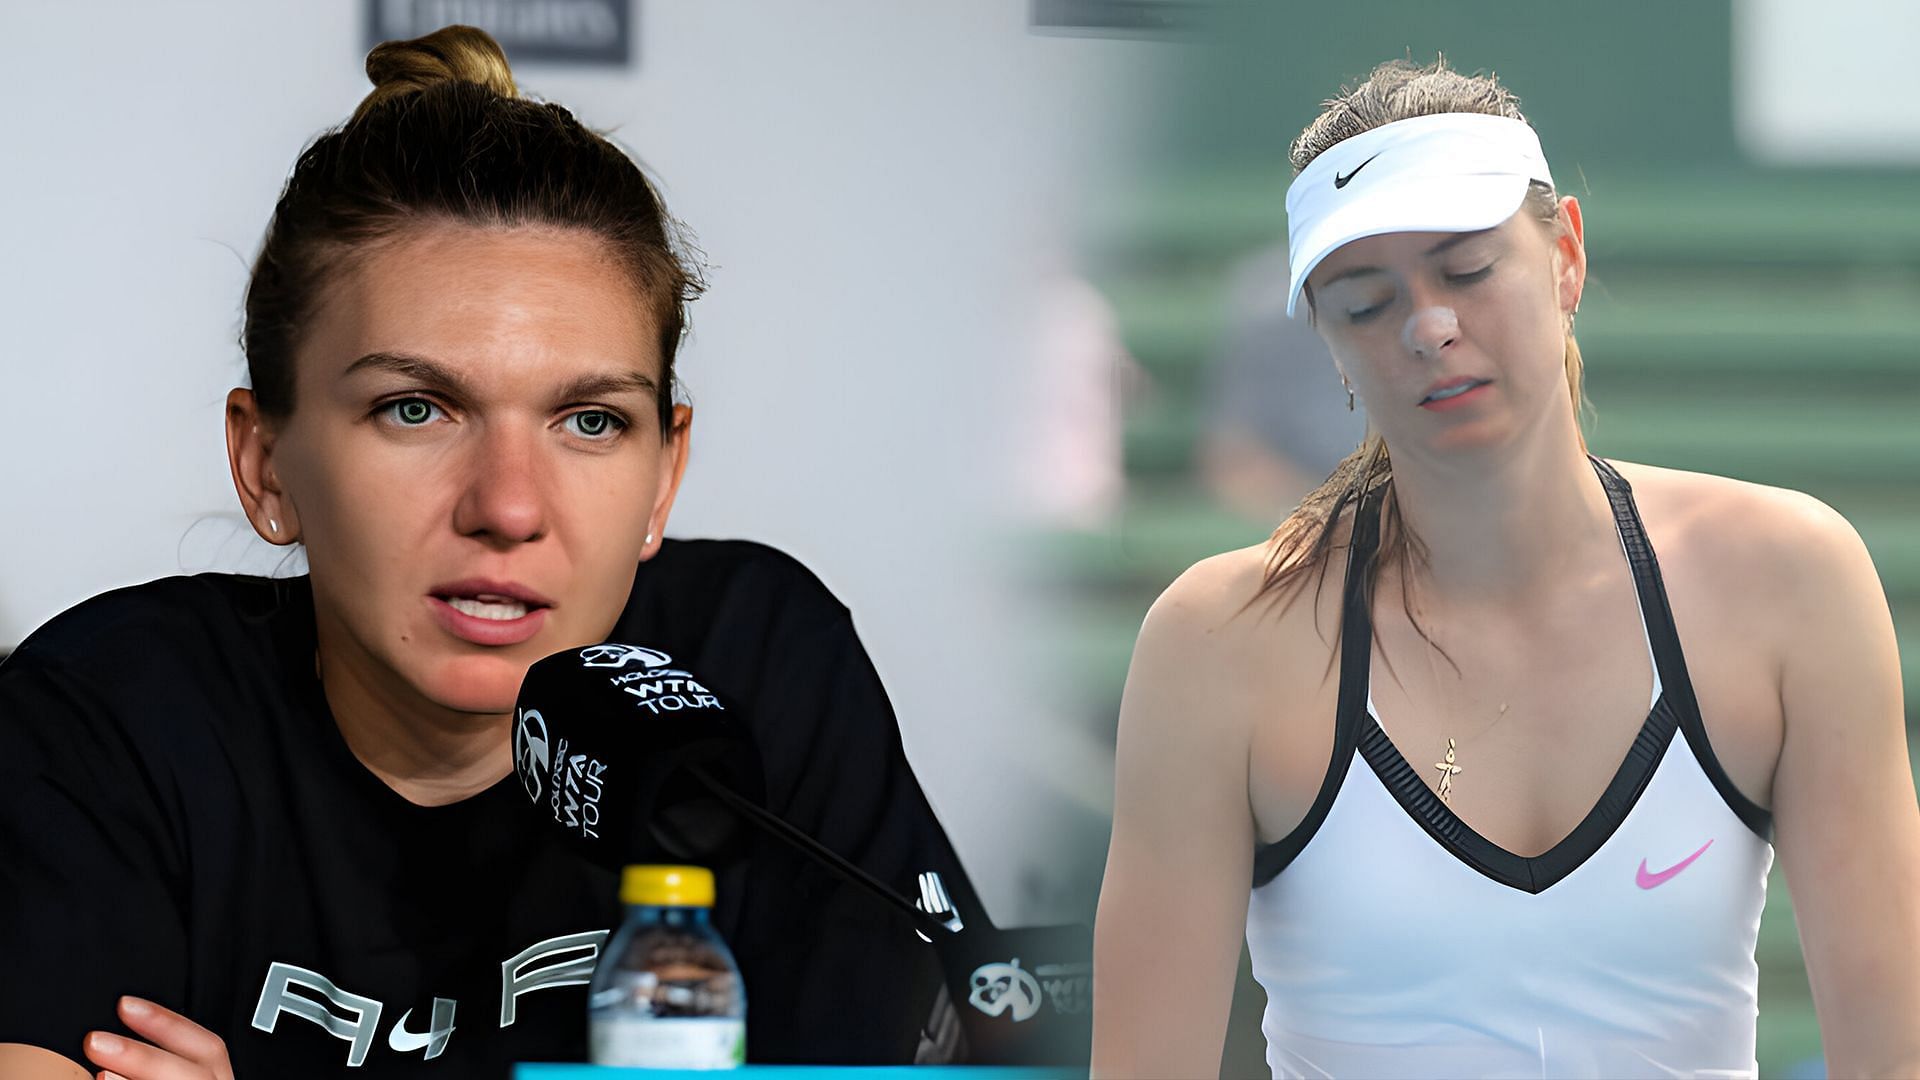 Fans have recalled Simona Halep